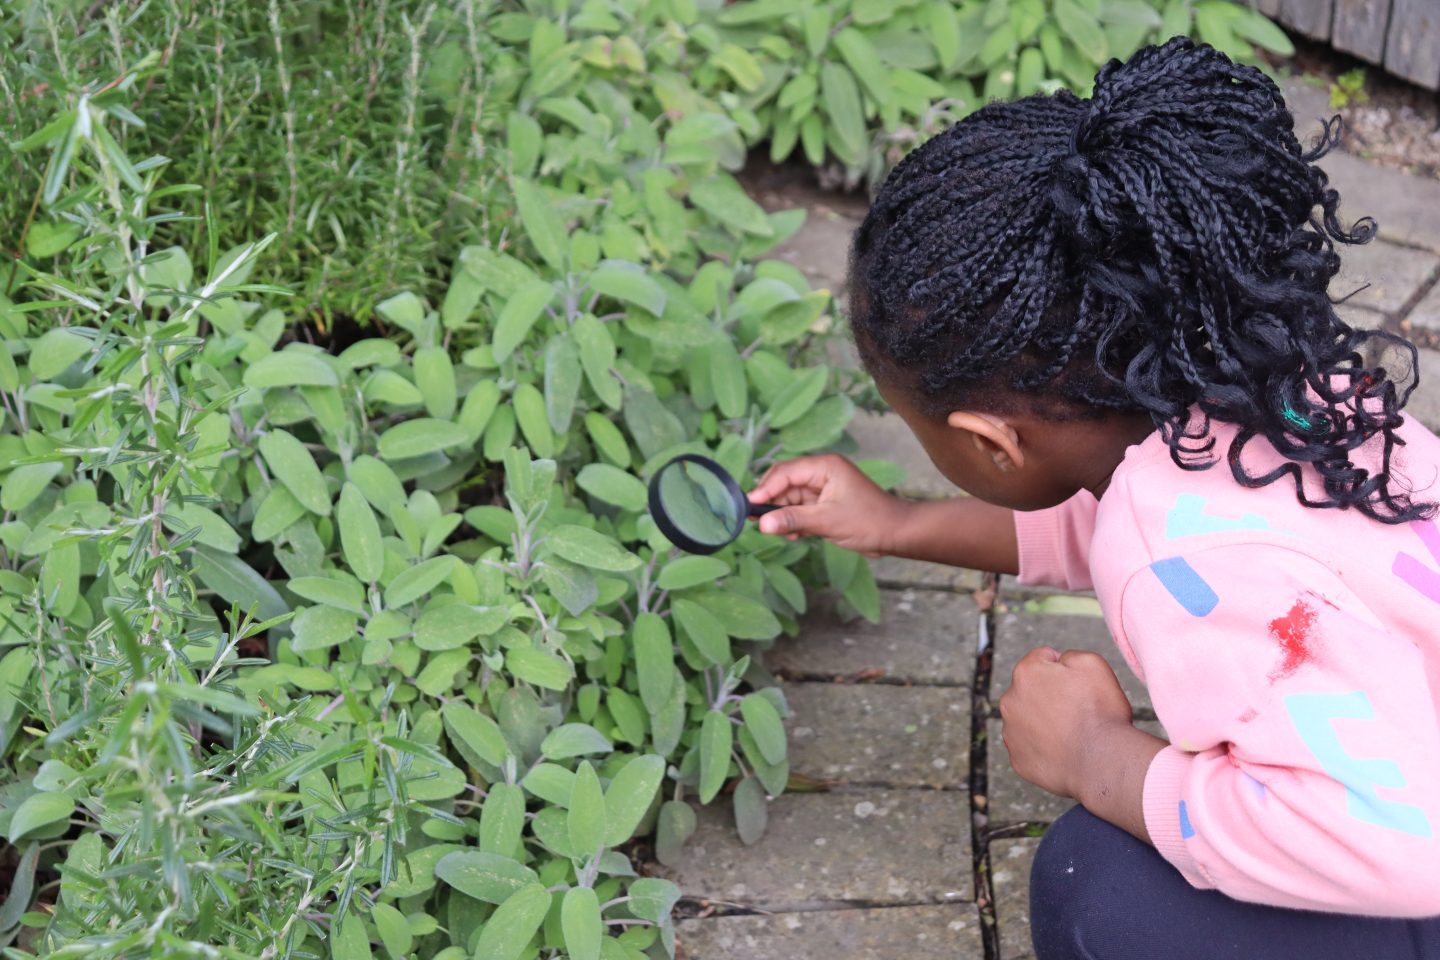 A young child kneels down and looks at some plants with a magnifying glass